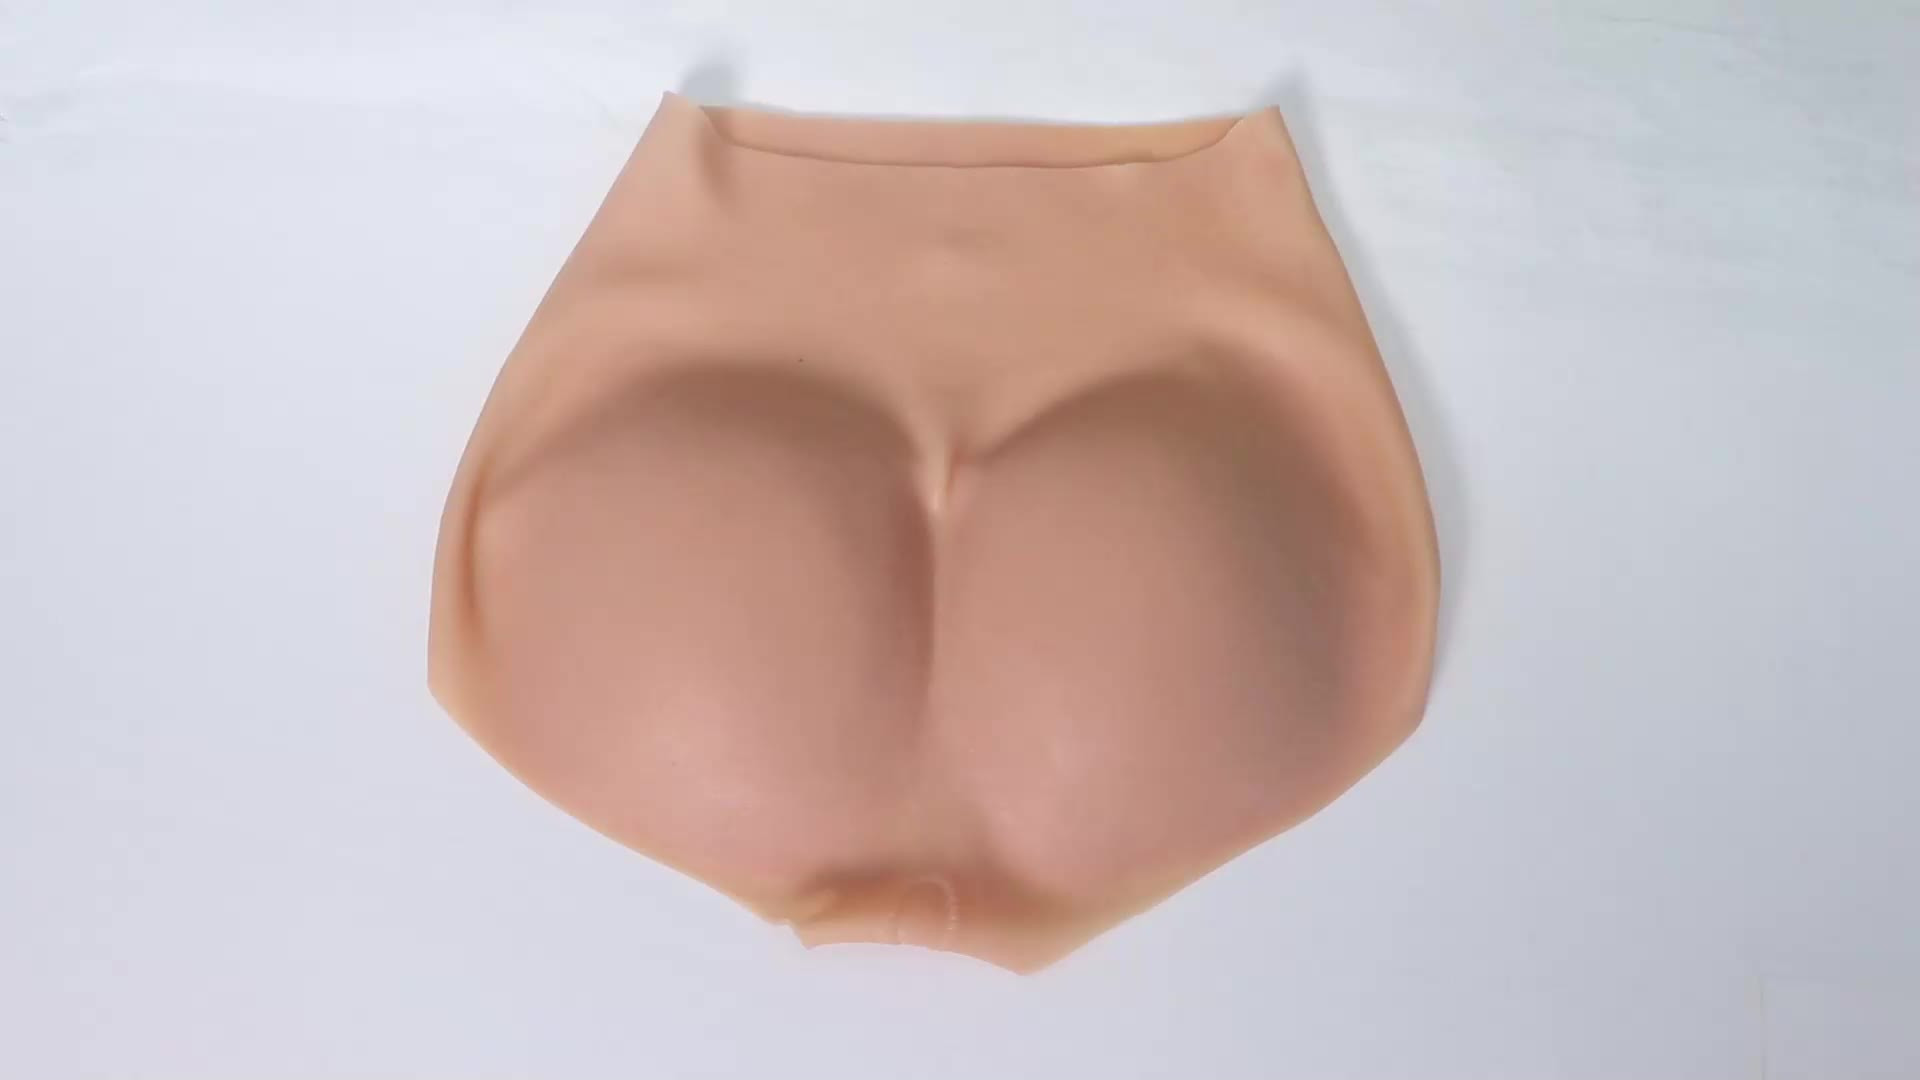 Buy Standard Quality China Wholesale Big Hips Enhancer Fake Buttocks  Silicone Butts Shapewear Pants For Female Womenpopular $85 Direct from  Factory at Henan Urchoice Electronics Technology Co., Ltd.